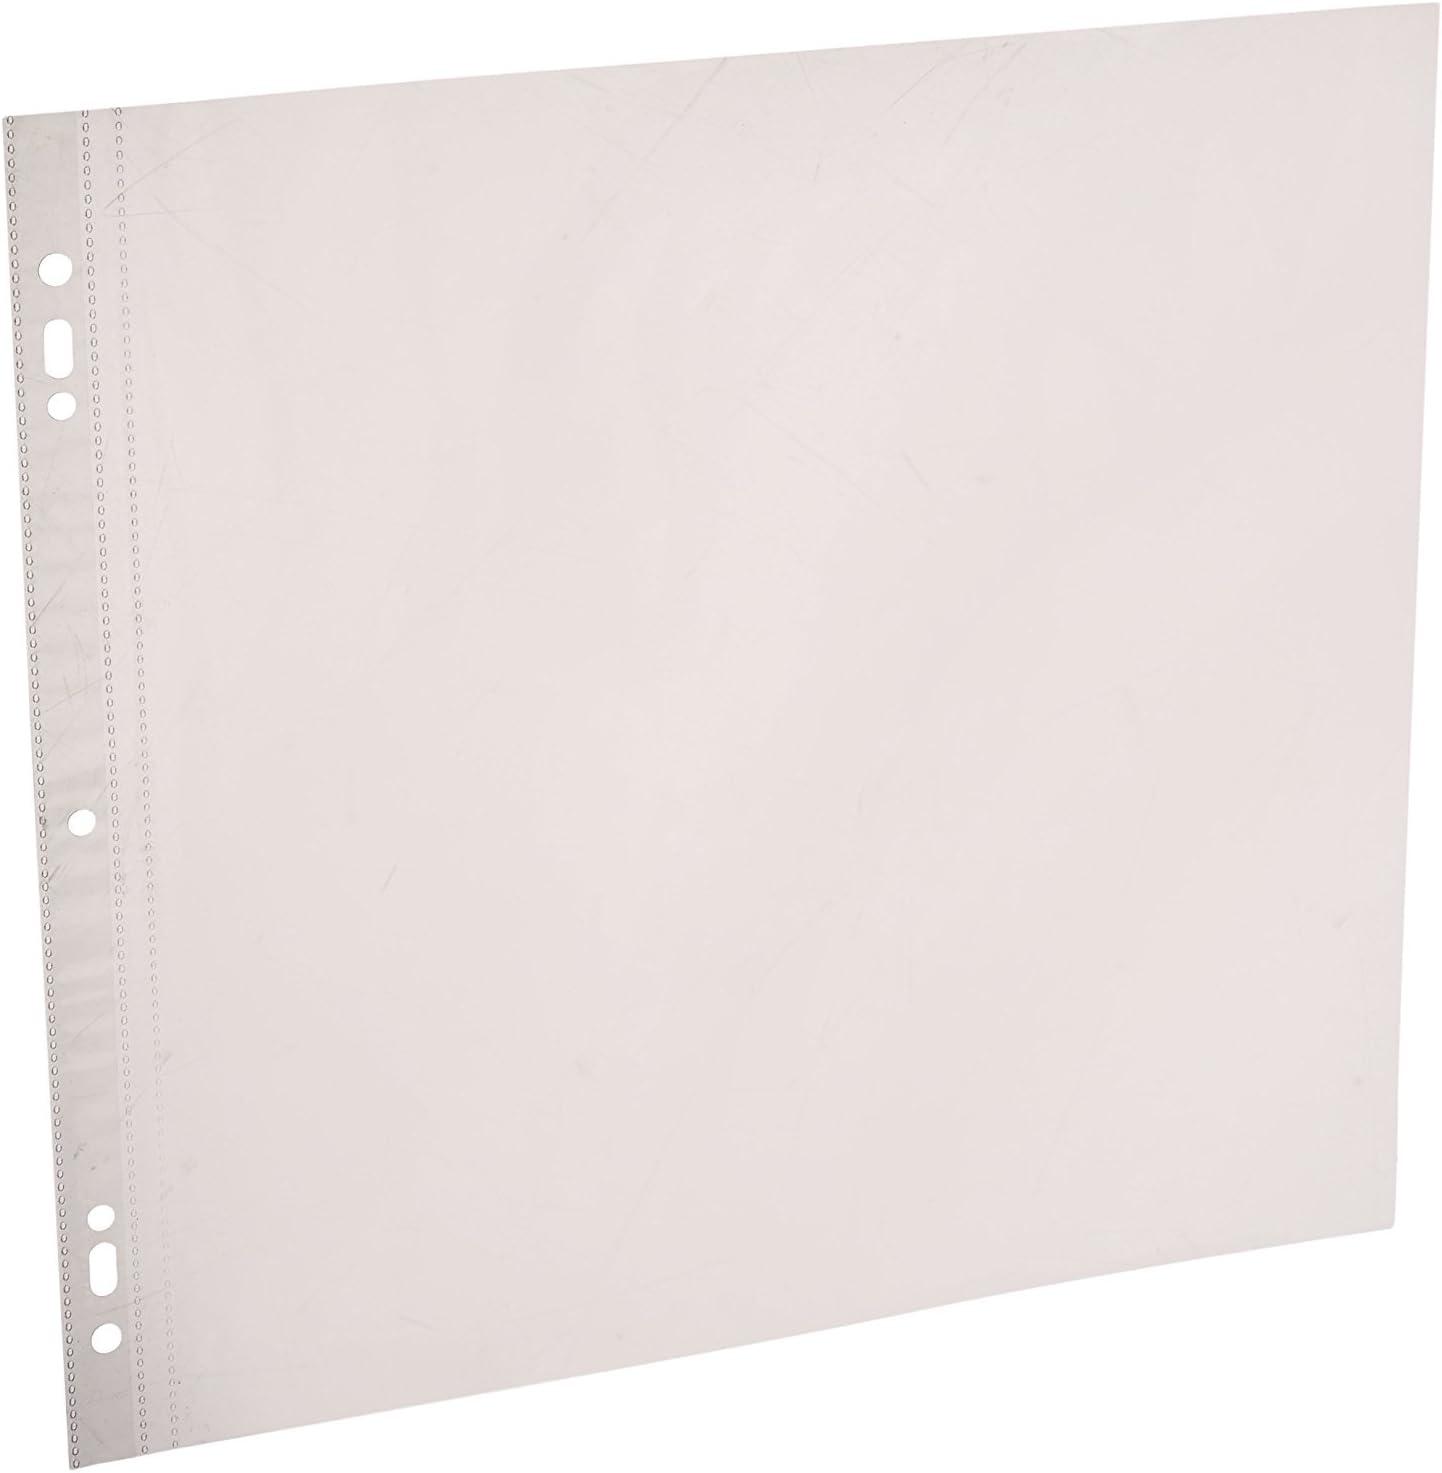 Colorbok Page Protectors (10 Pack) 12 by 12 White